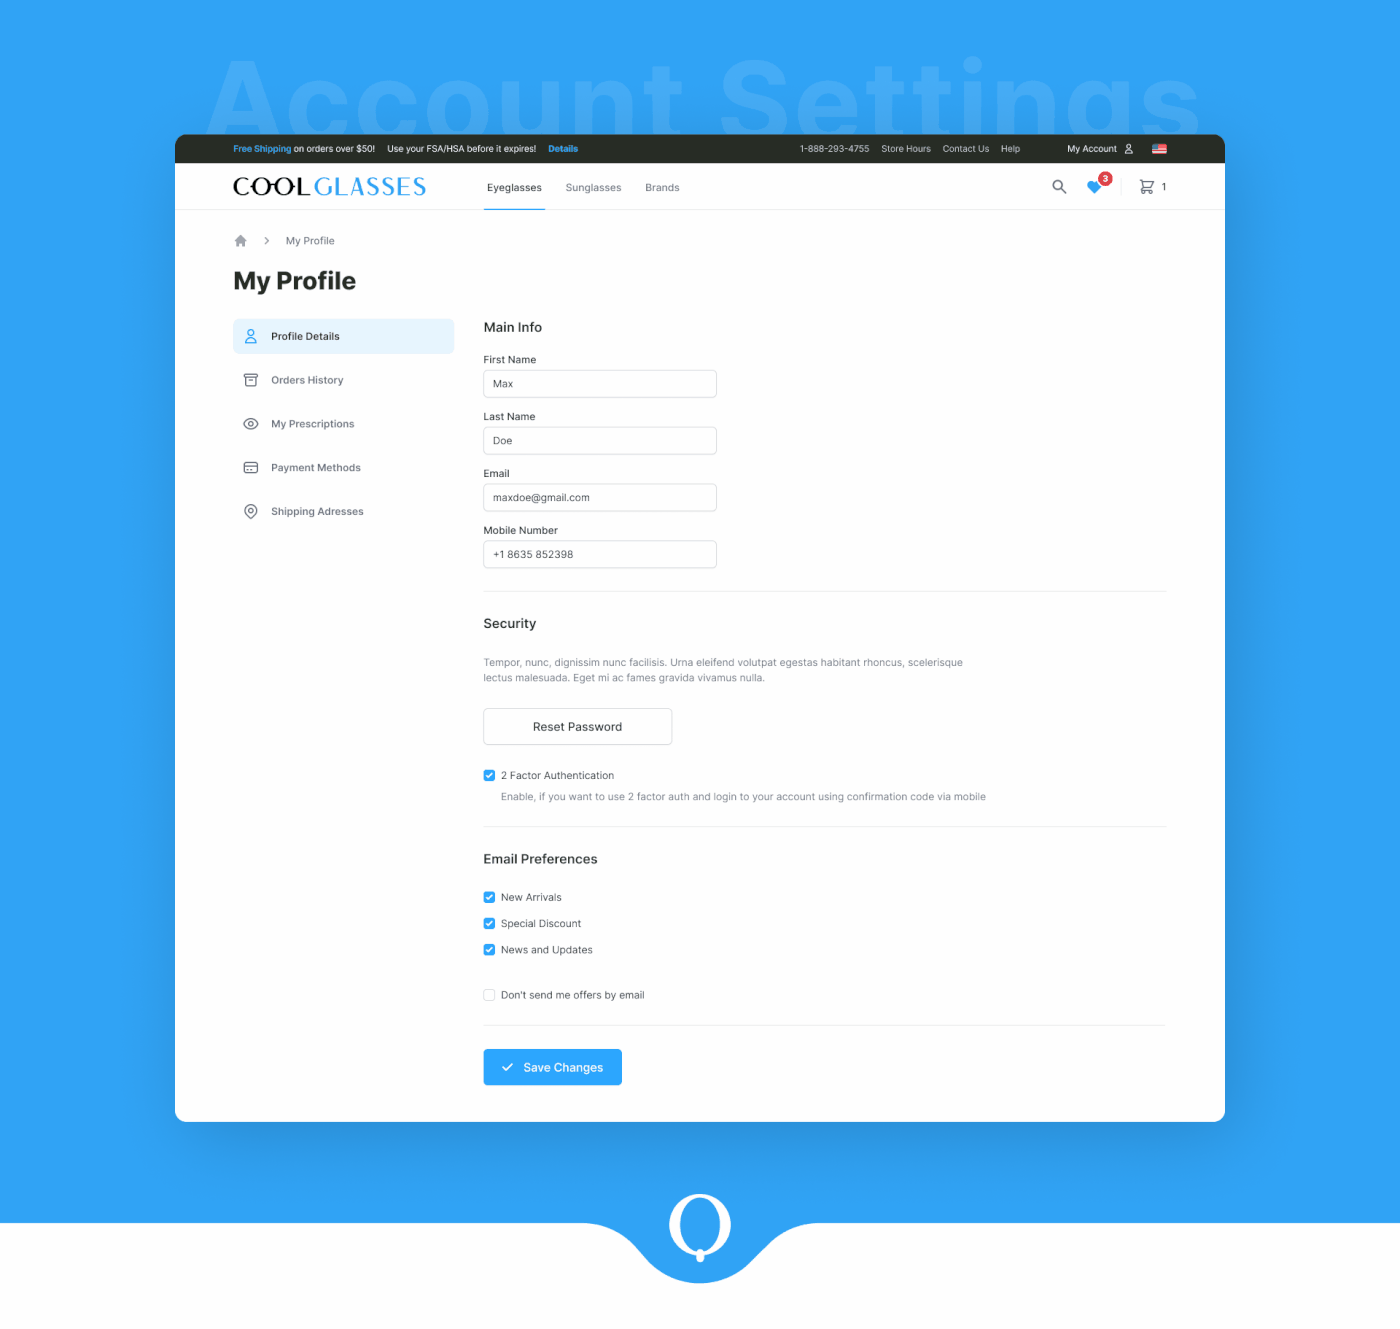 The settings page can group different types of features: Profile, notifications, orders history